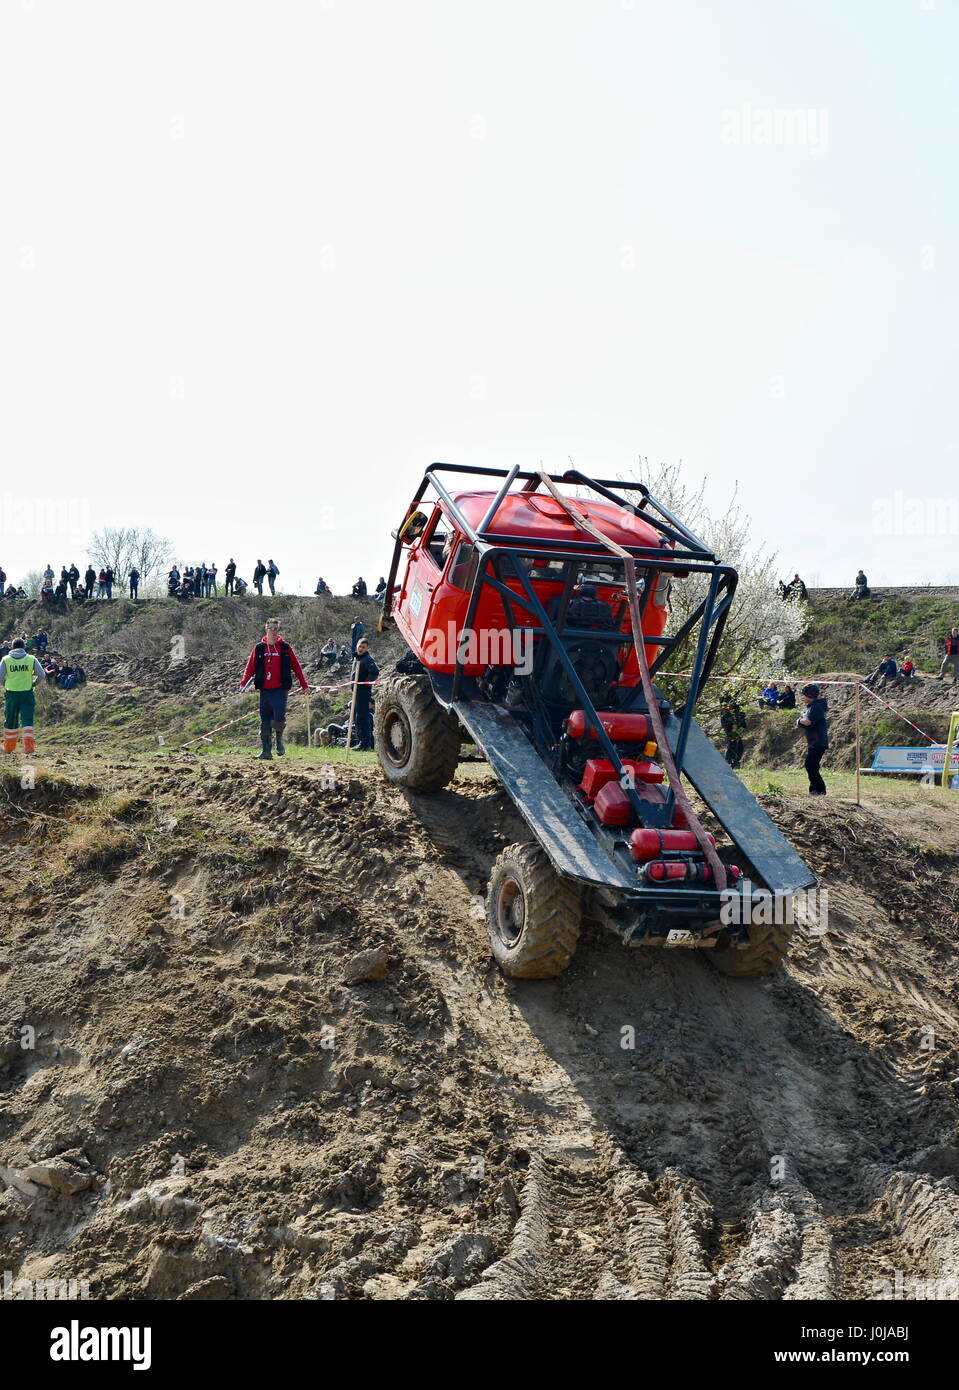 MILOVICE, CZECH REPUBLIC - APRIL 09, 2017: Unidentified truck at difficult muddy terrain during truck trial National championship show of Czech Republ Stock Photo